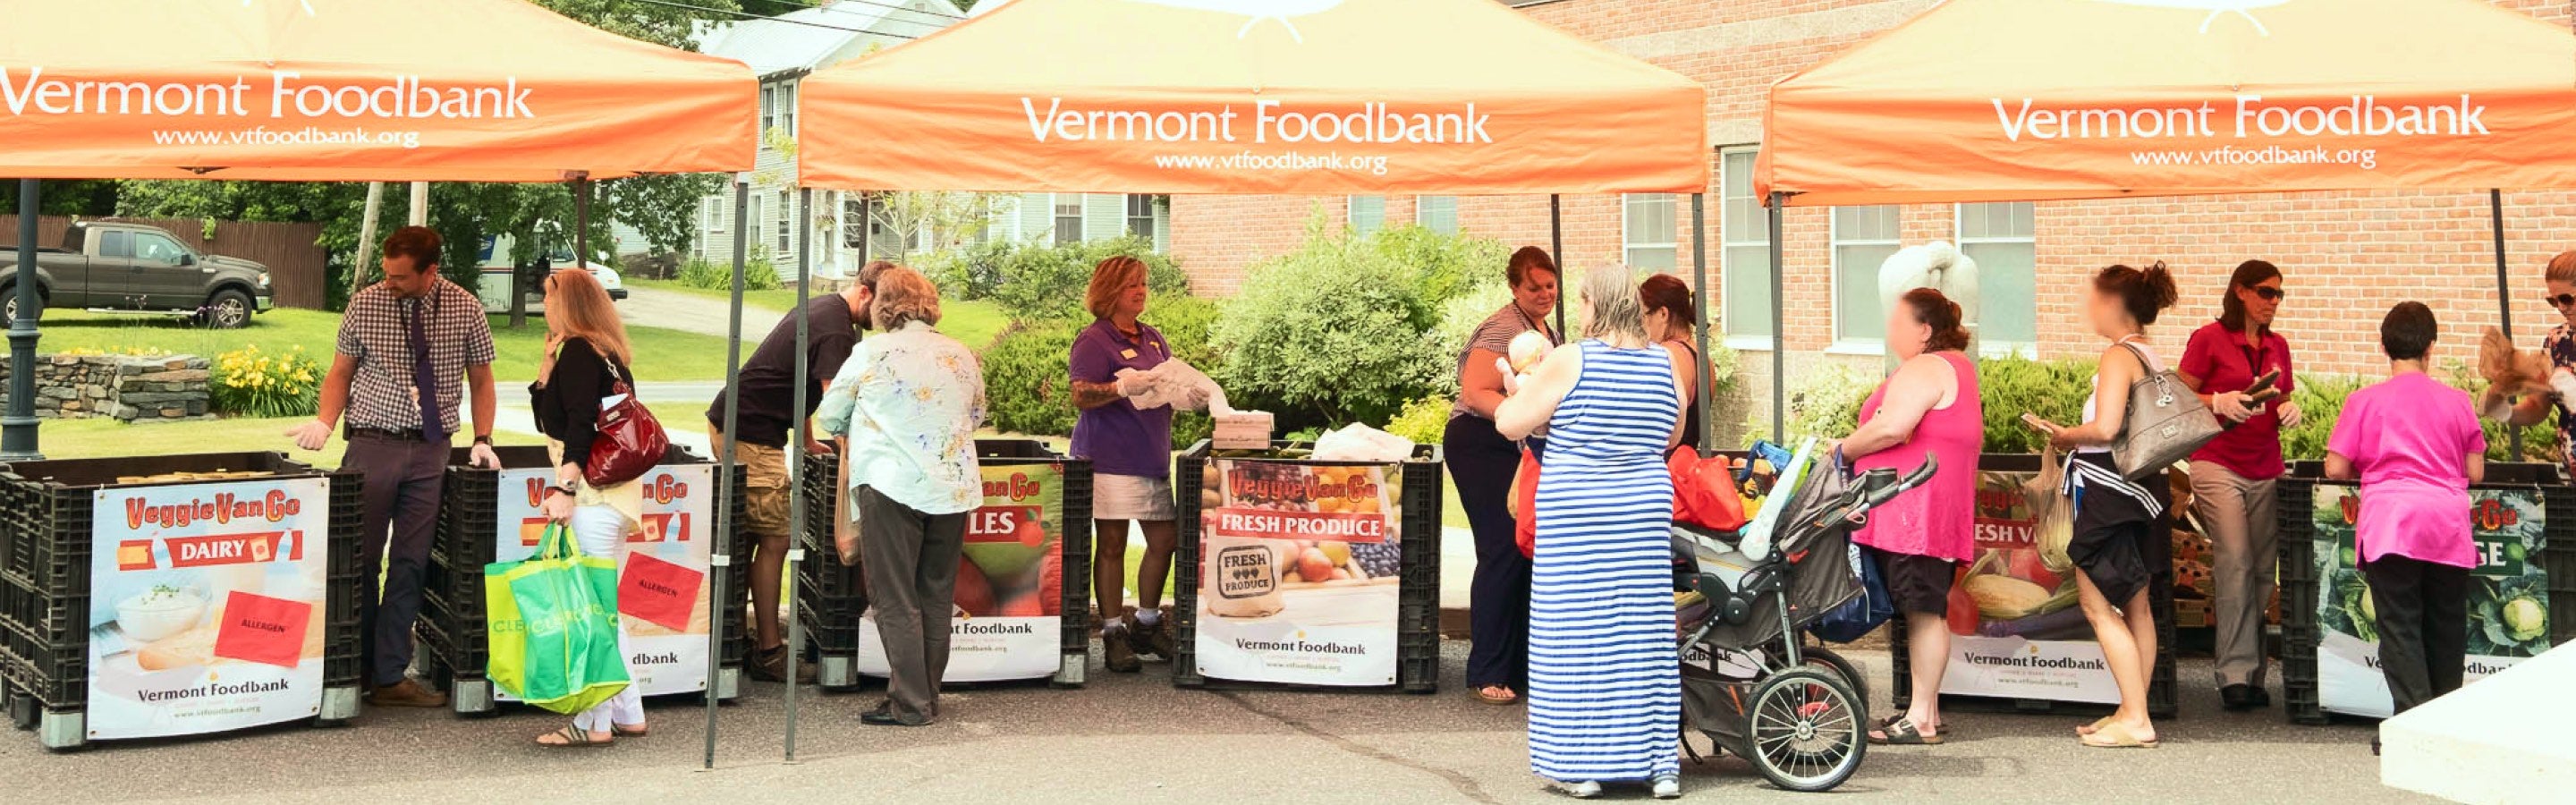 Booths of the Vermont Foodbank setup in the community, giving out food to those in need